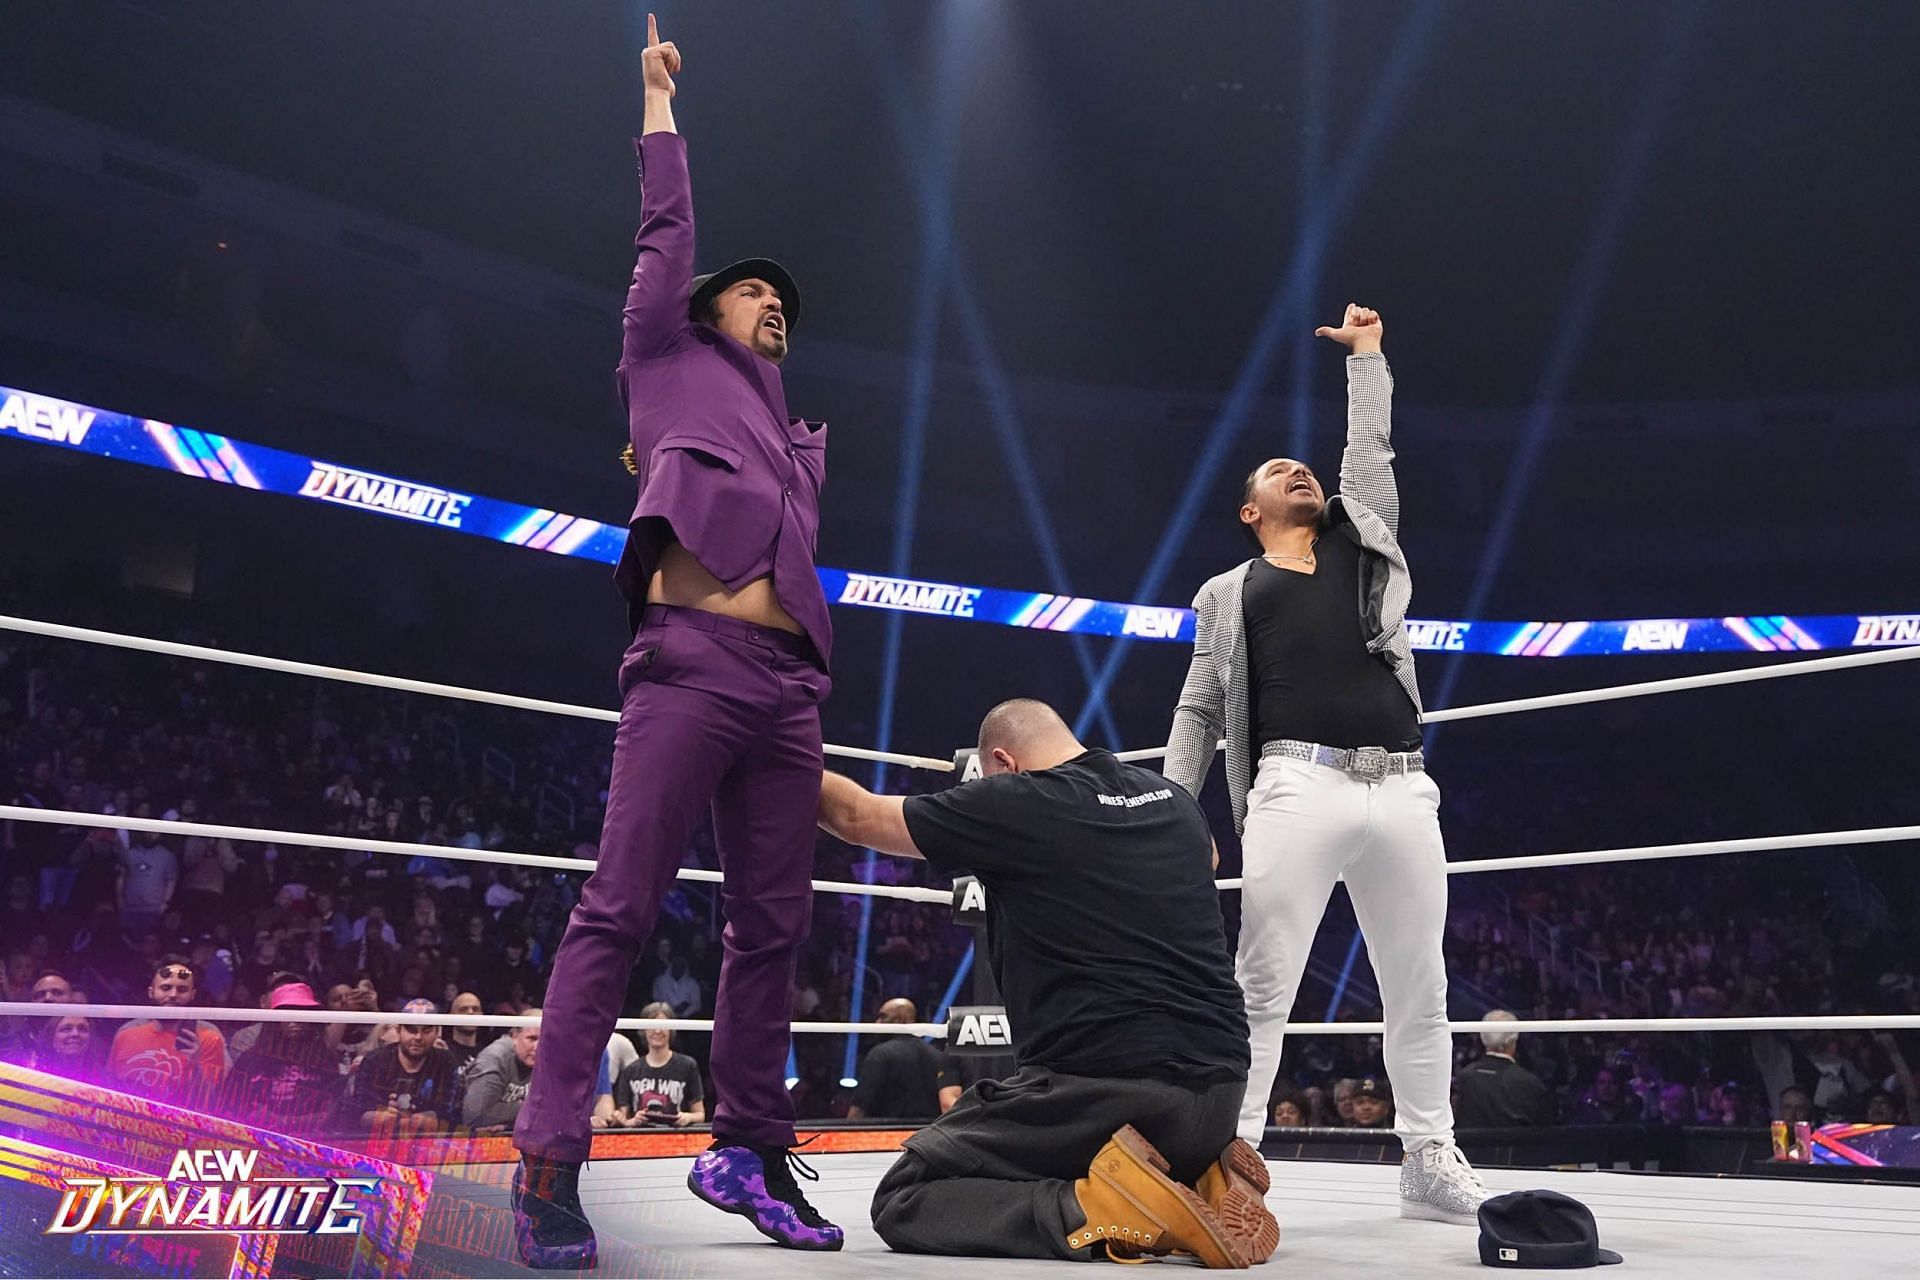 The Young Bucks have taken their roles of being Executive Vice Presidents more seriously recently [Photos courtesy of AEW